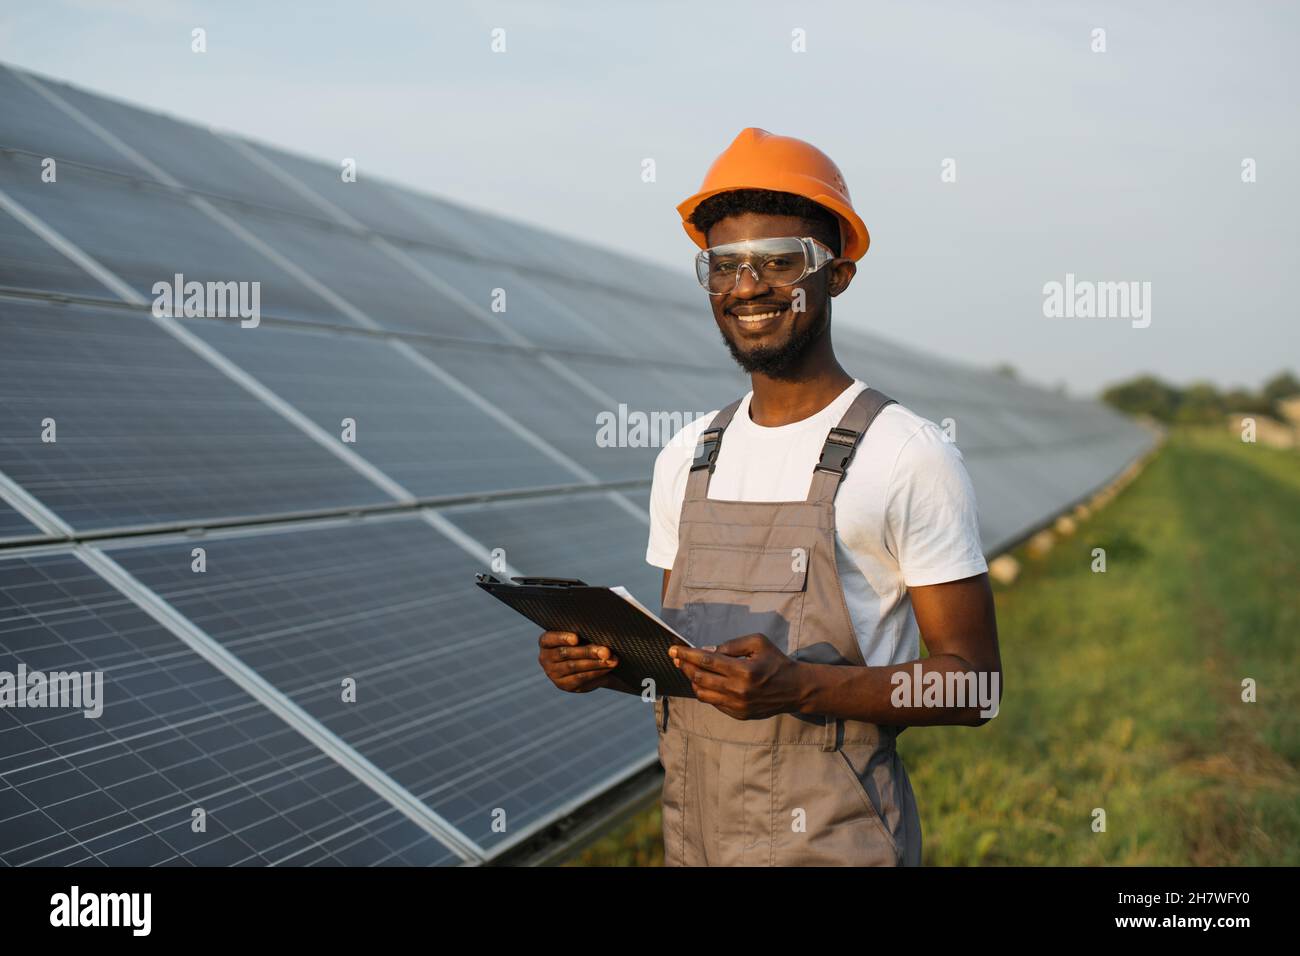 Portrait of smiling african american man in safety glasses and orange helmet holding clipboard while standing on field with solar panels. Concept of service work and alternative energy. Stock Photo